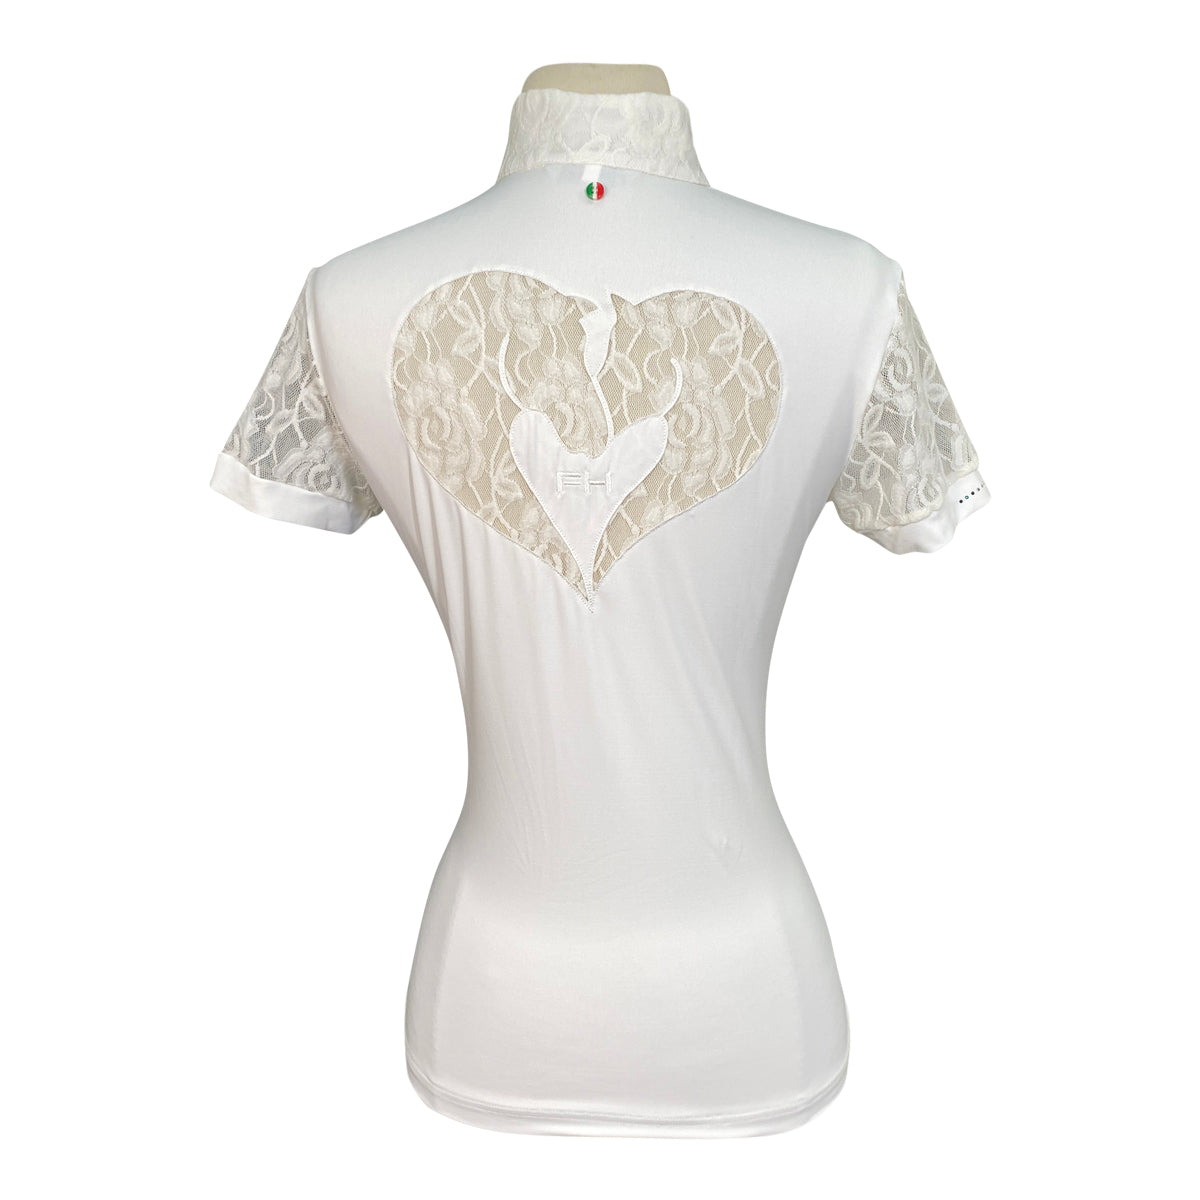 For Horses 'Stella' Show Shirt in White